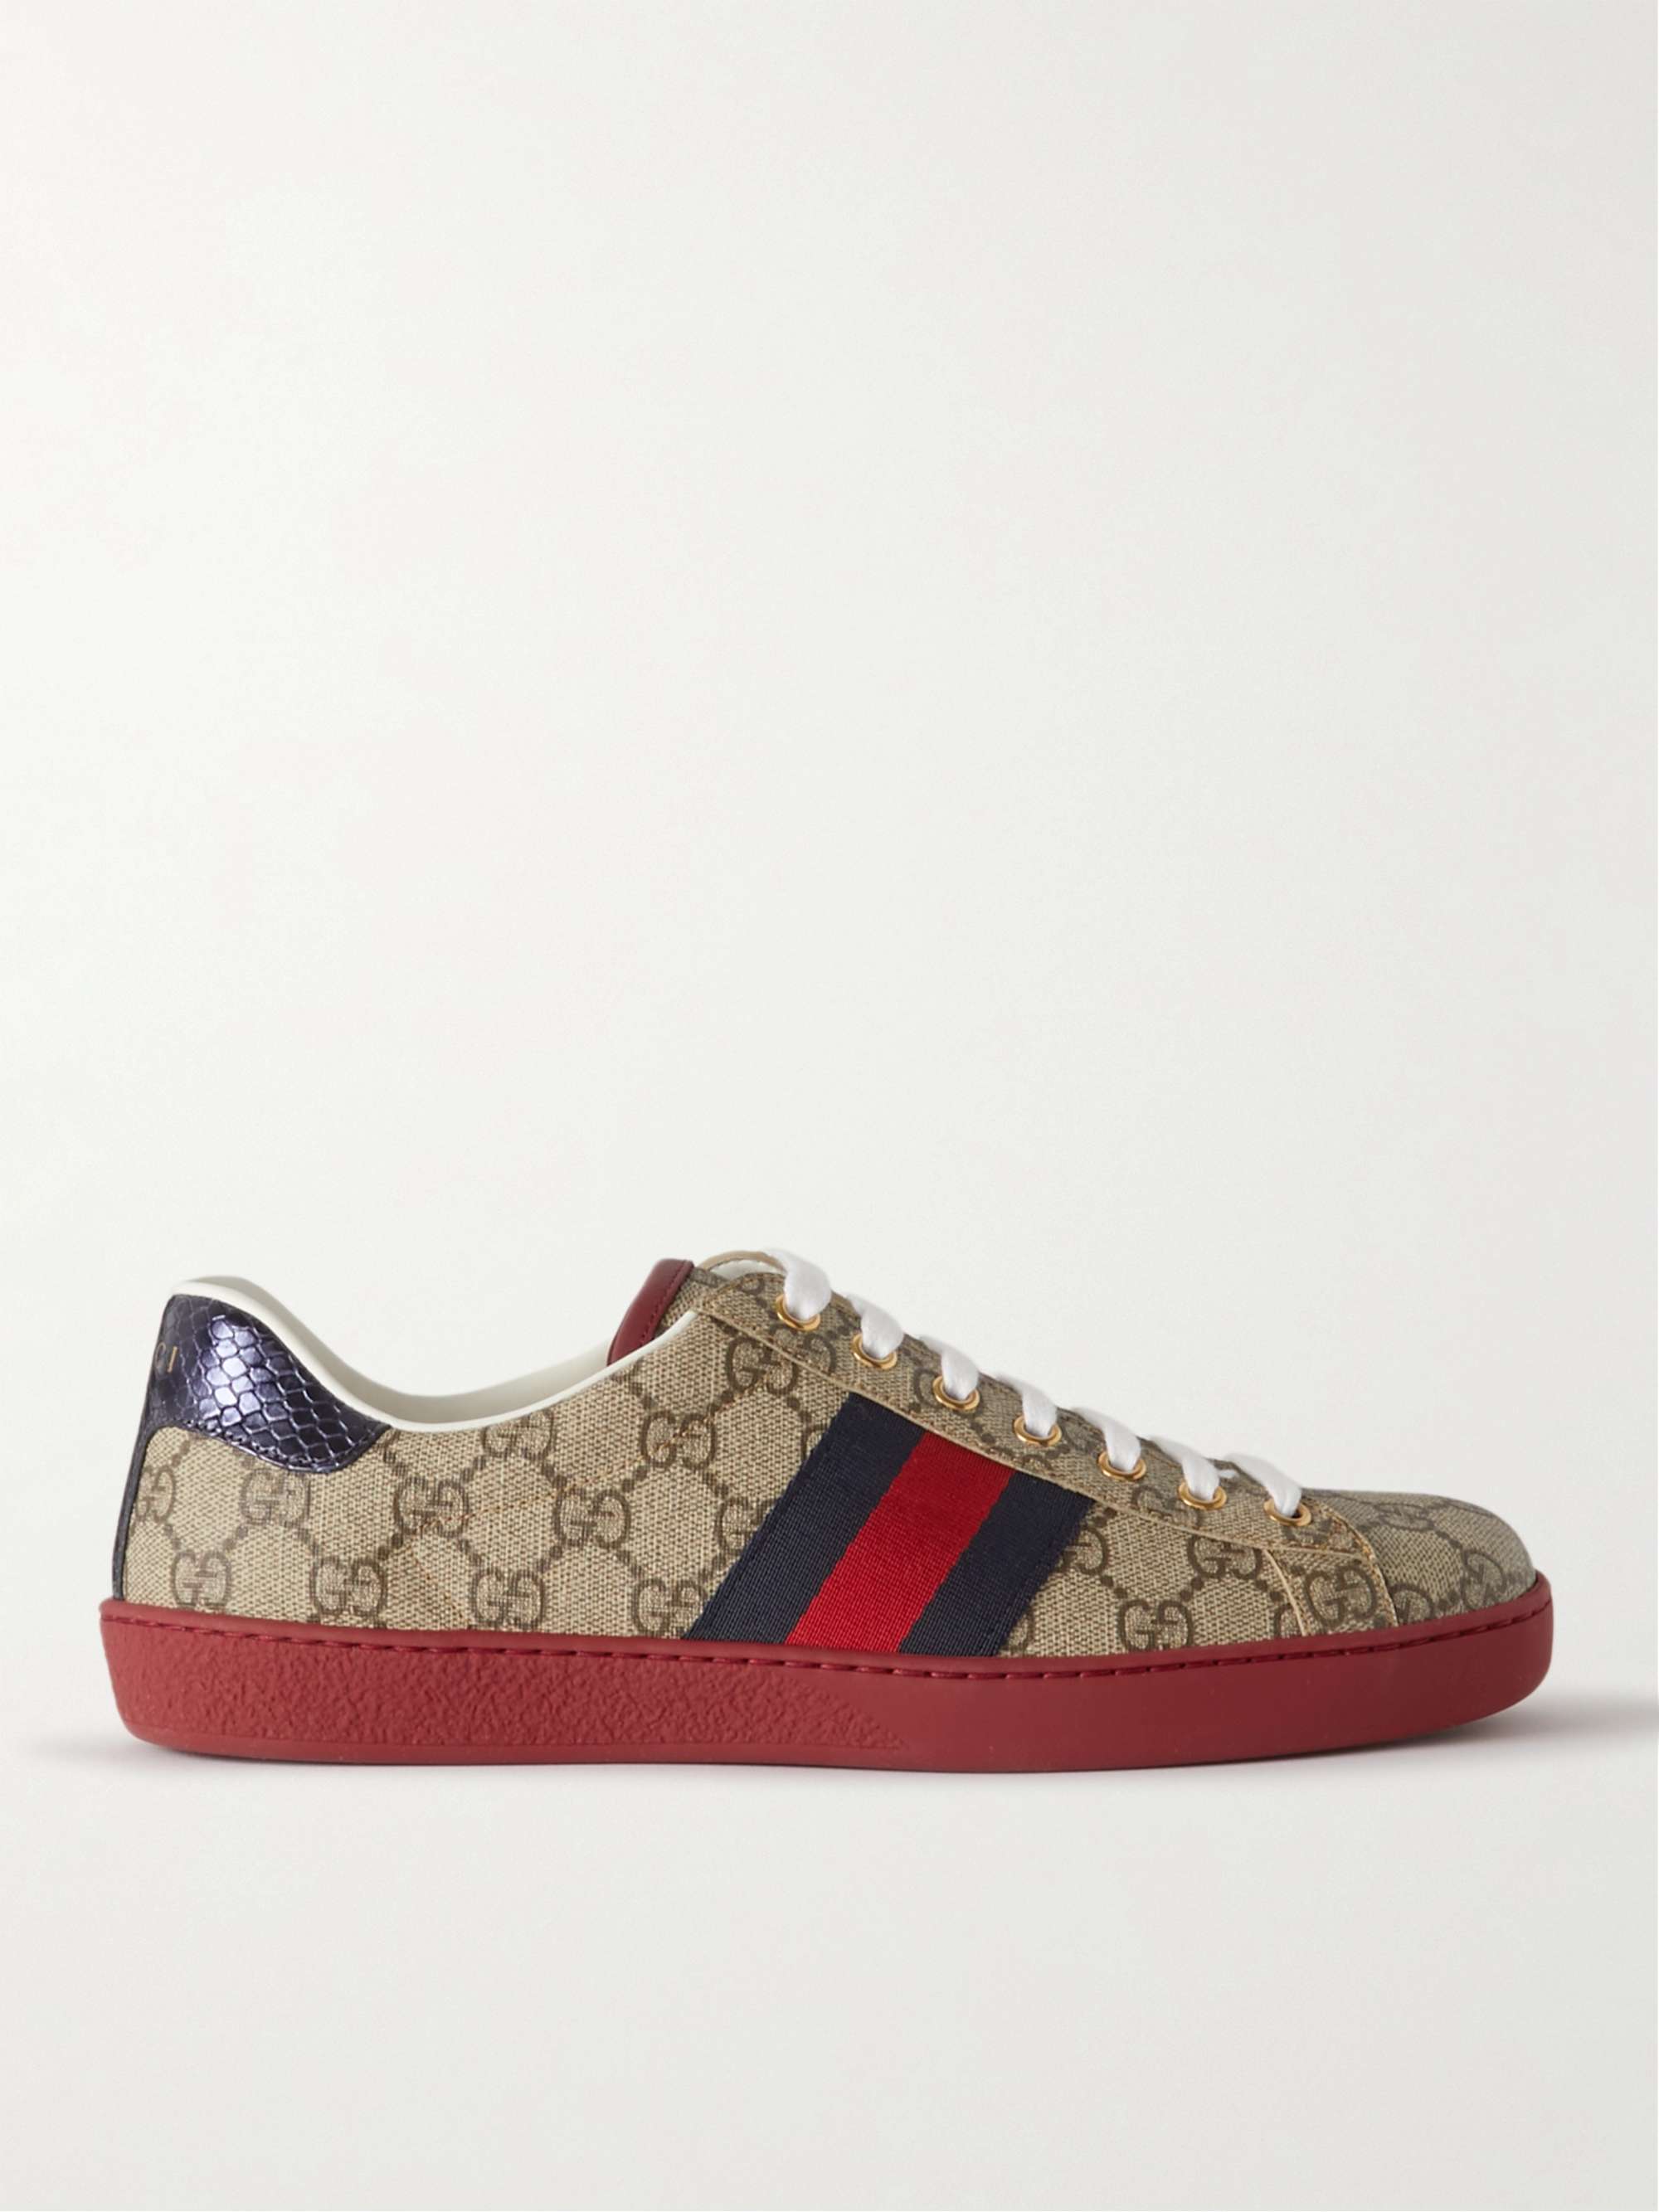 GUCCI Ace Webbing-Trimmed Monogrammed Coated-Canvas Sneakers | MR PORTER